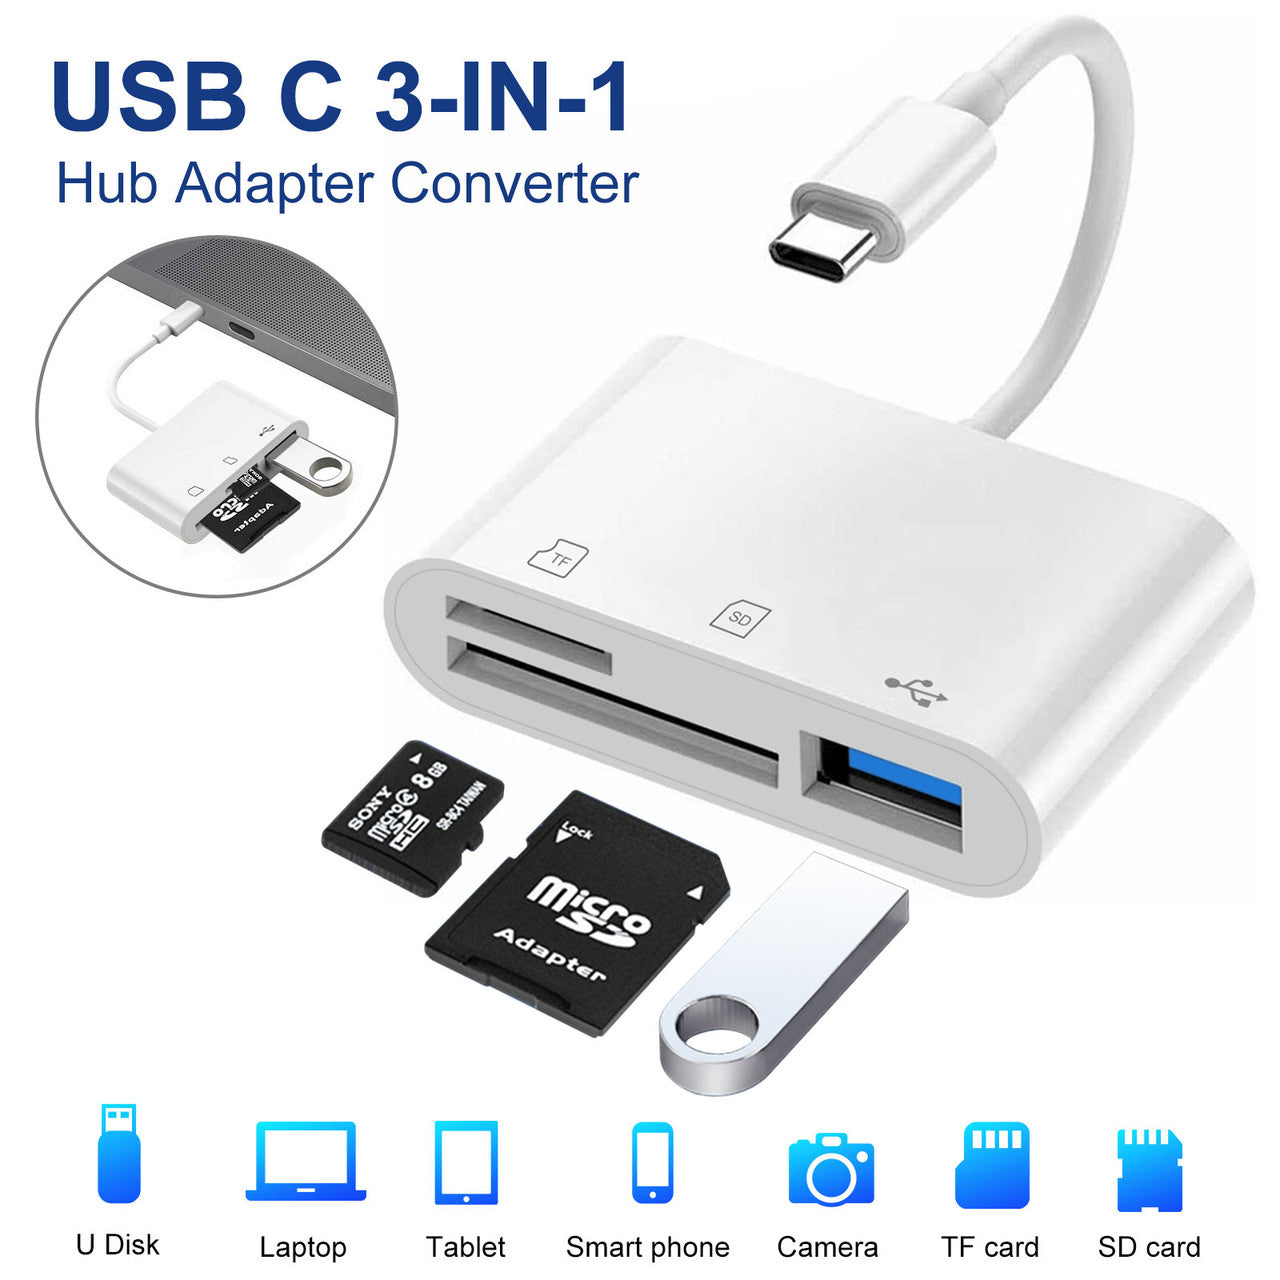 3 IN 1 Portable Space Aluminum Dongle Compatible with MacBook Pro/Air, Dell XPS, More Type C Devices